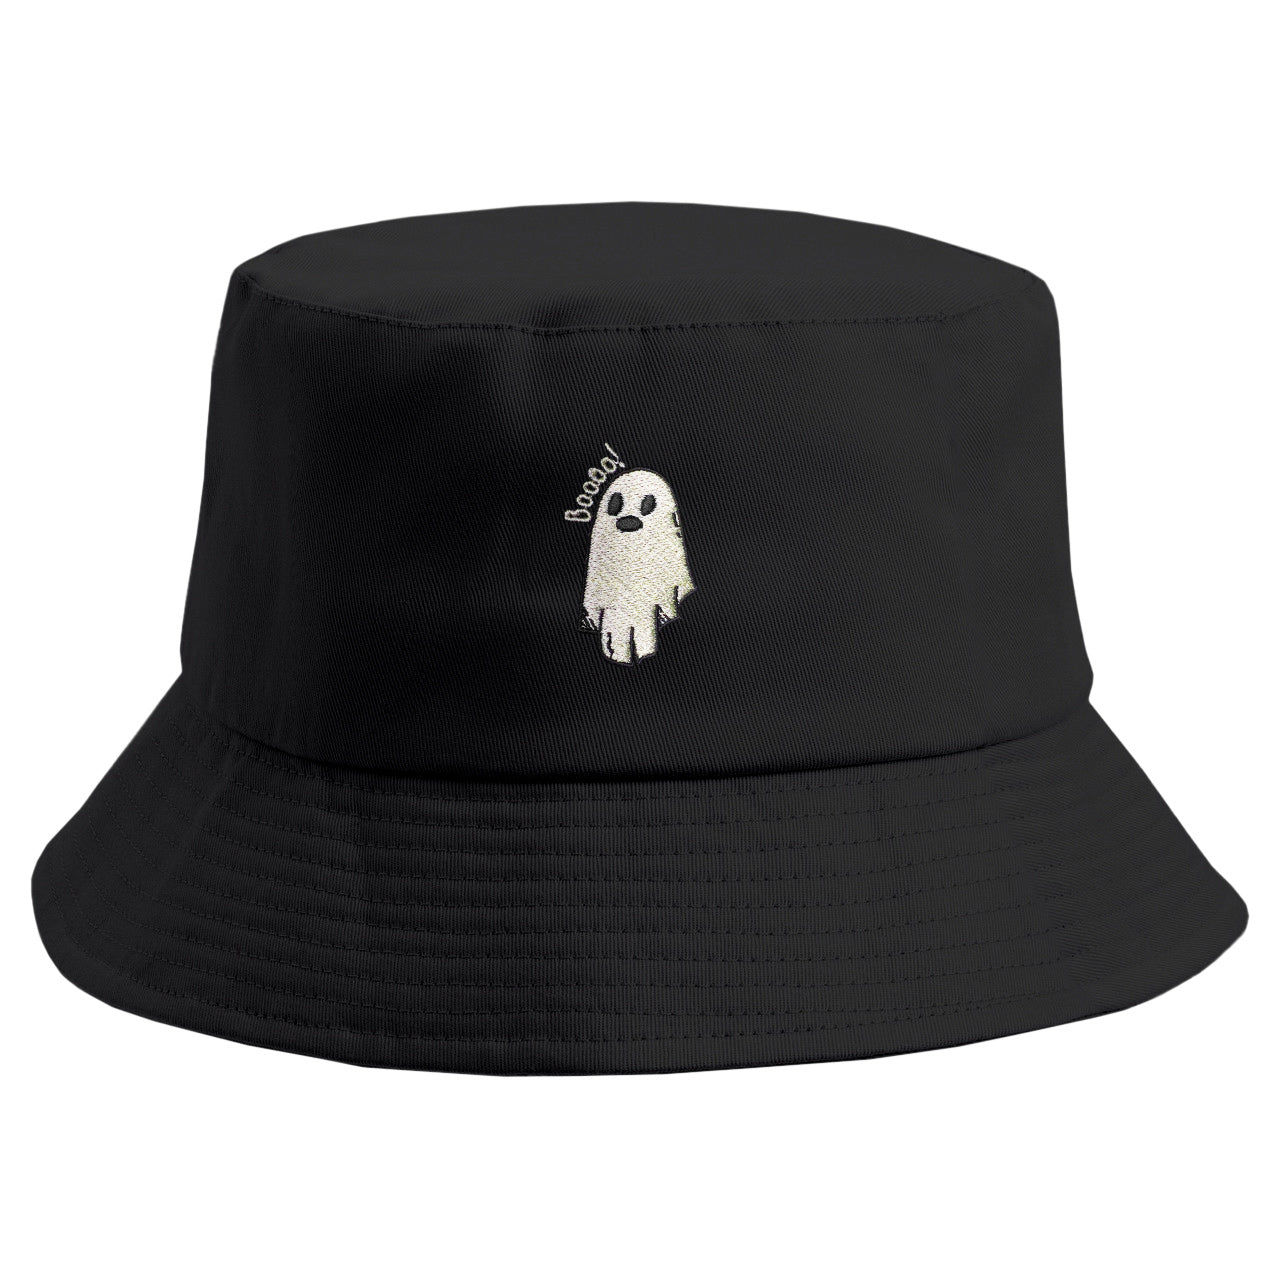 Embroidered Ghost Bucket Hat